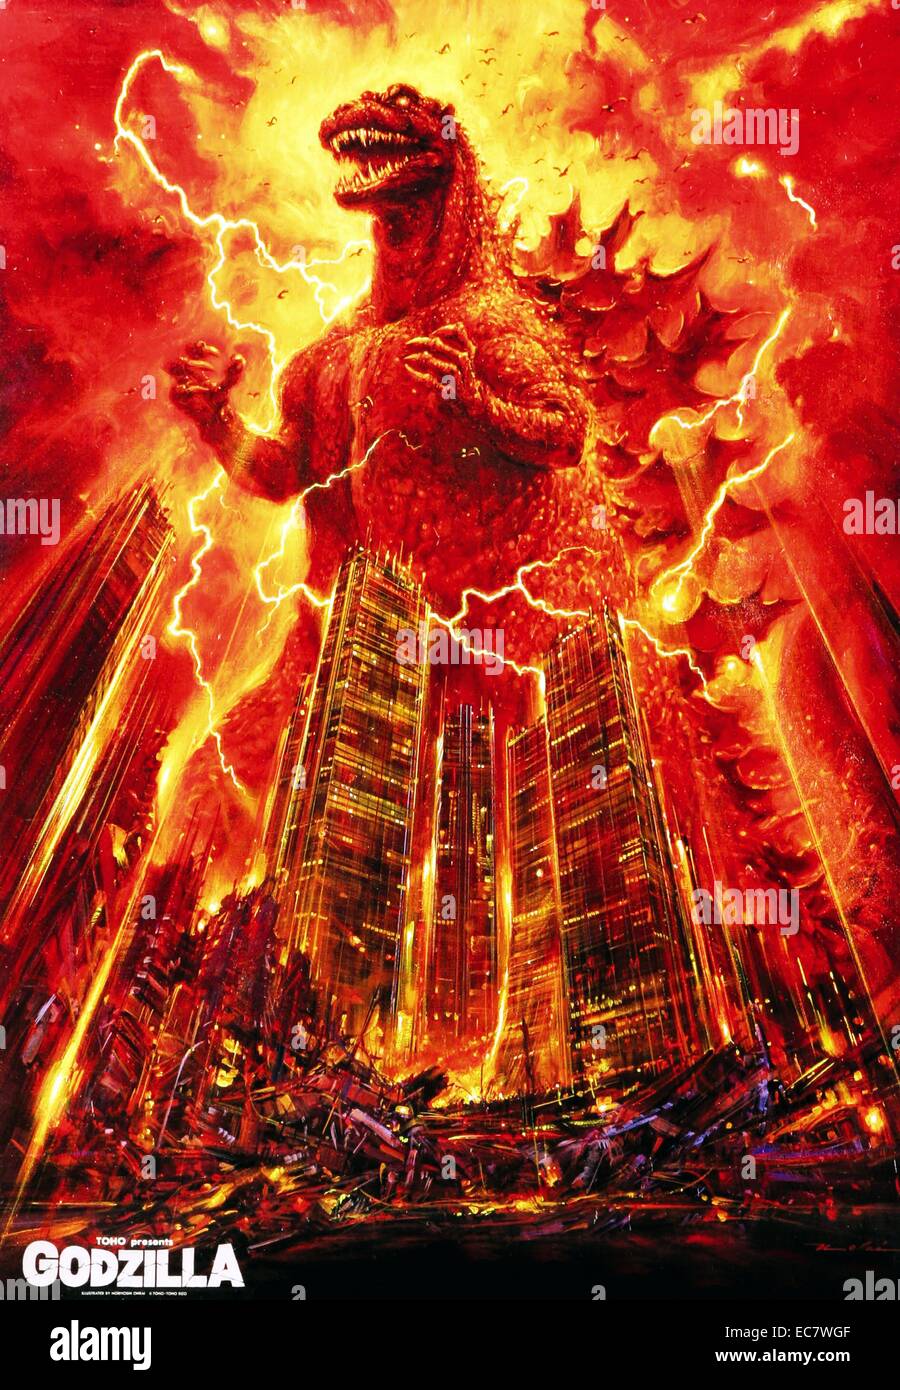 Download Godzilla Earth: The King in Action Wallpaper